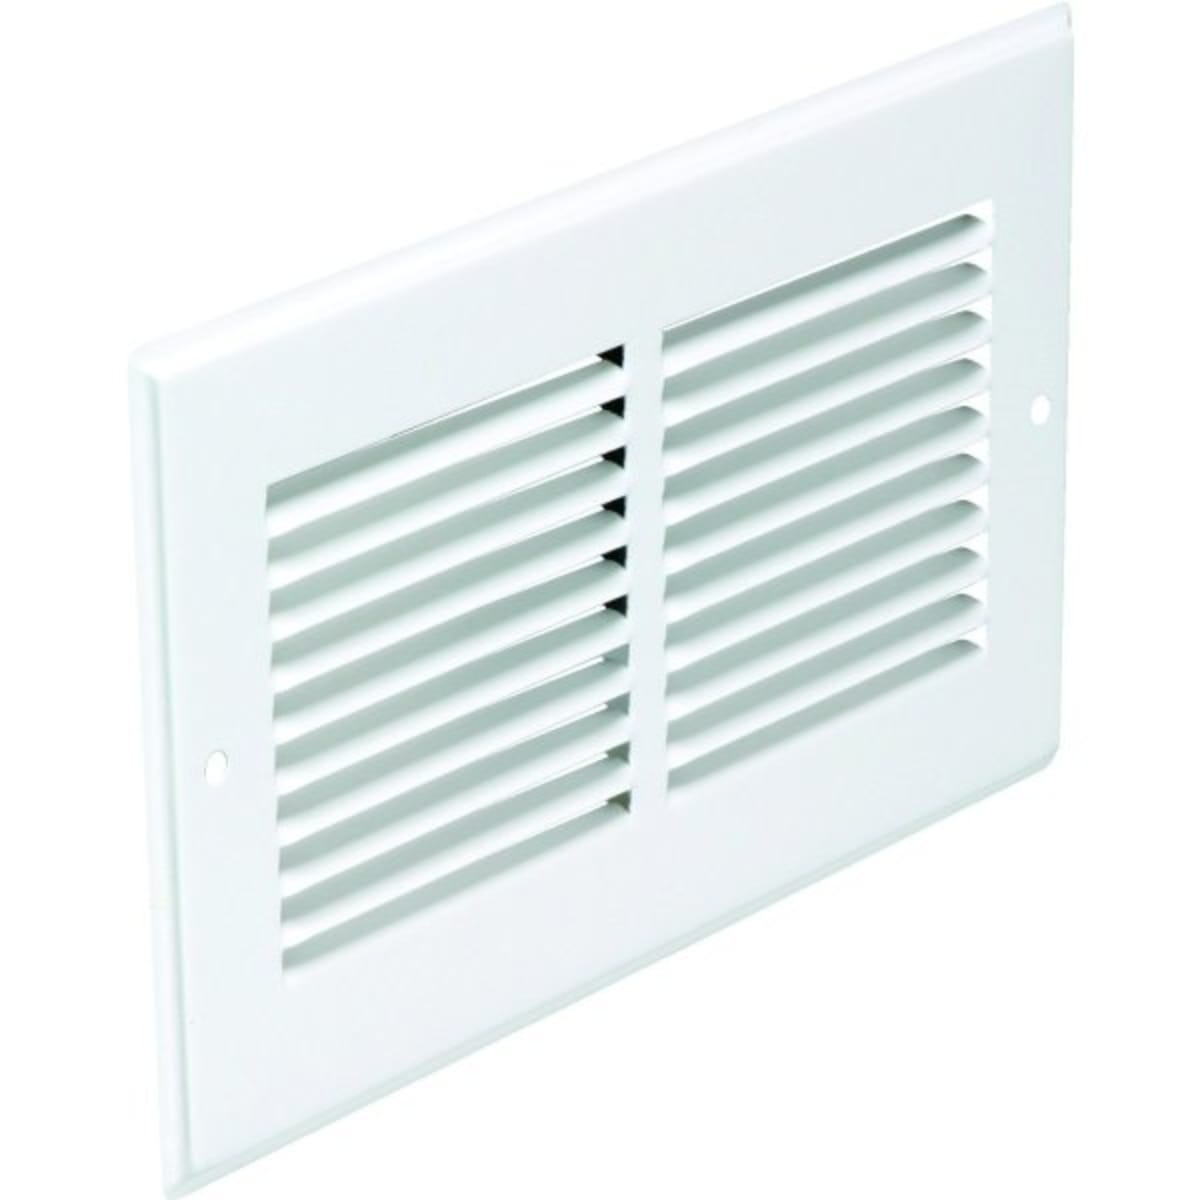 Supply Air Grille with Two Rows Adjustable Blades - Sivent Official Website